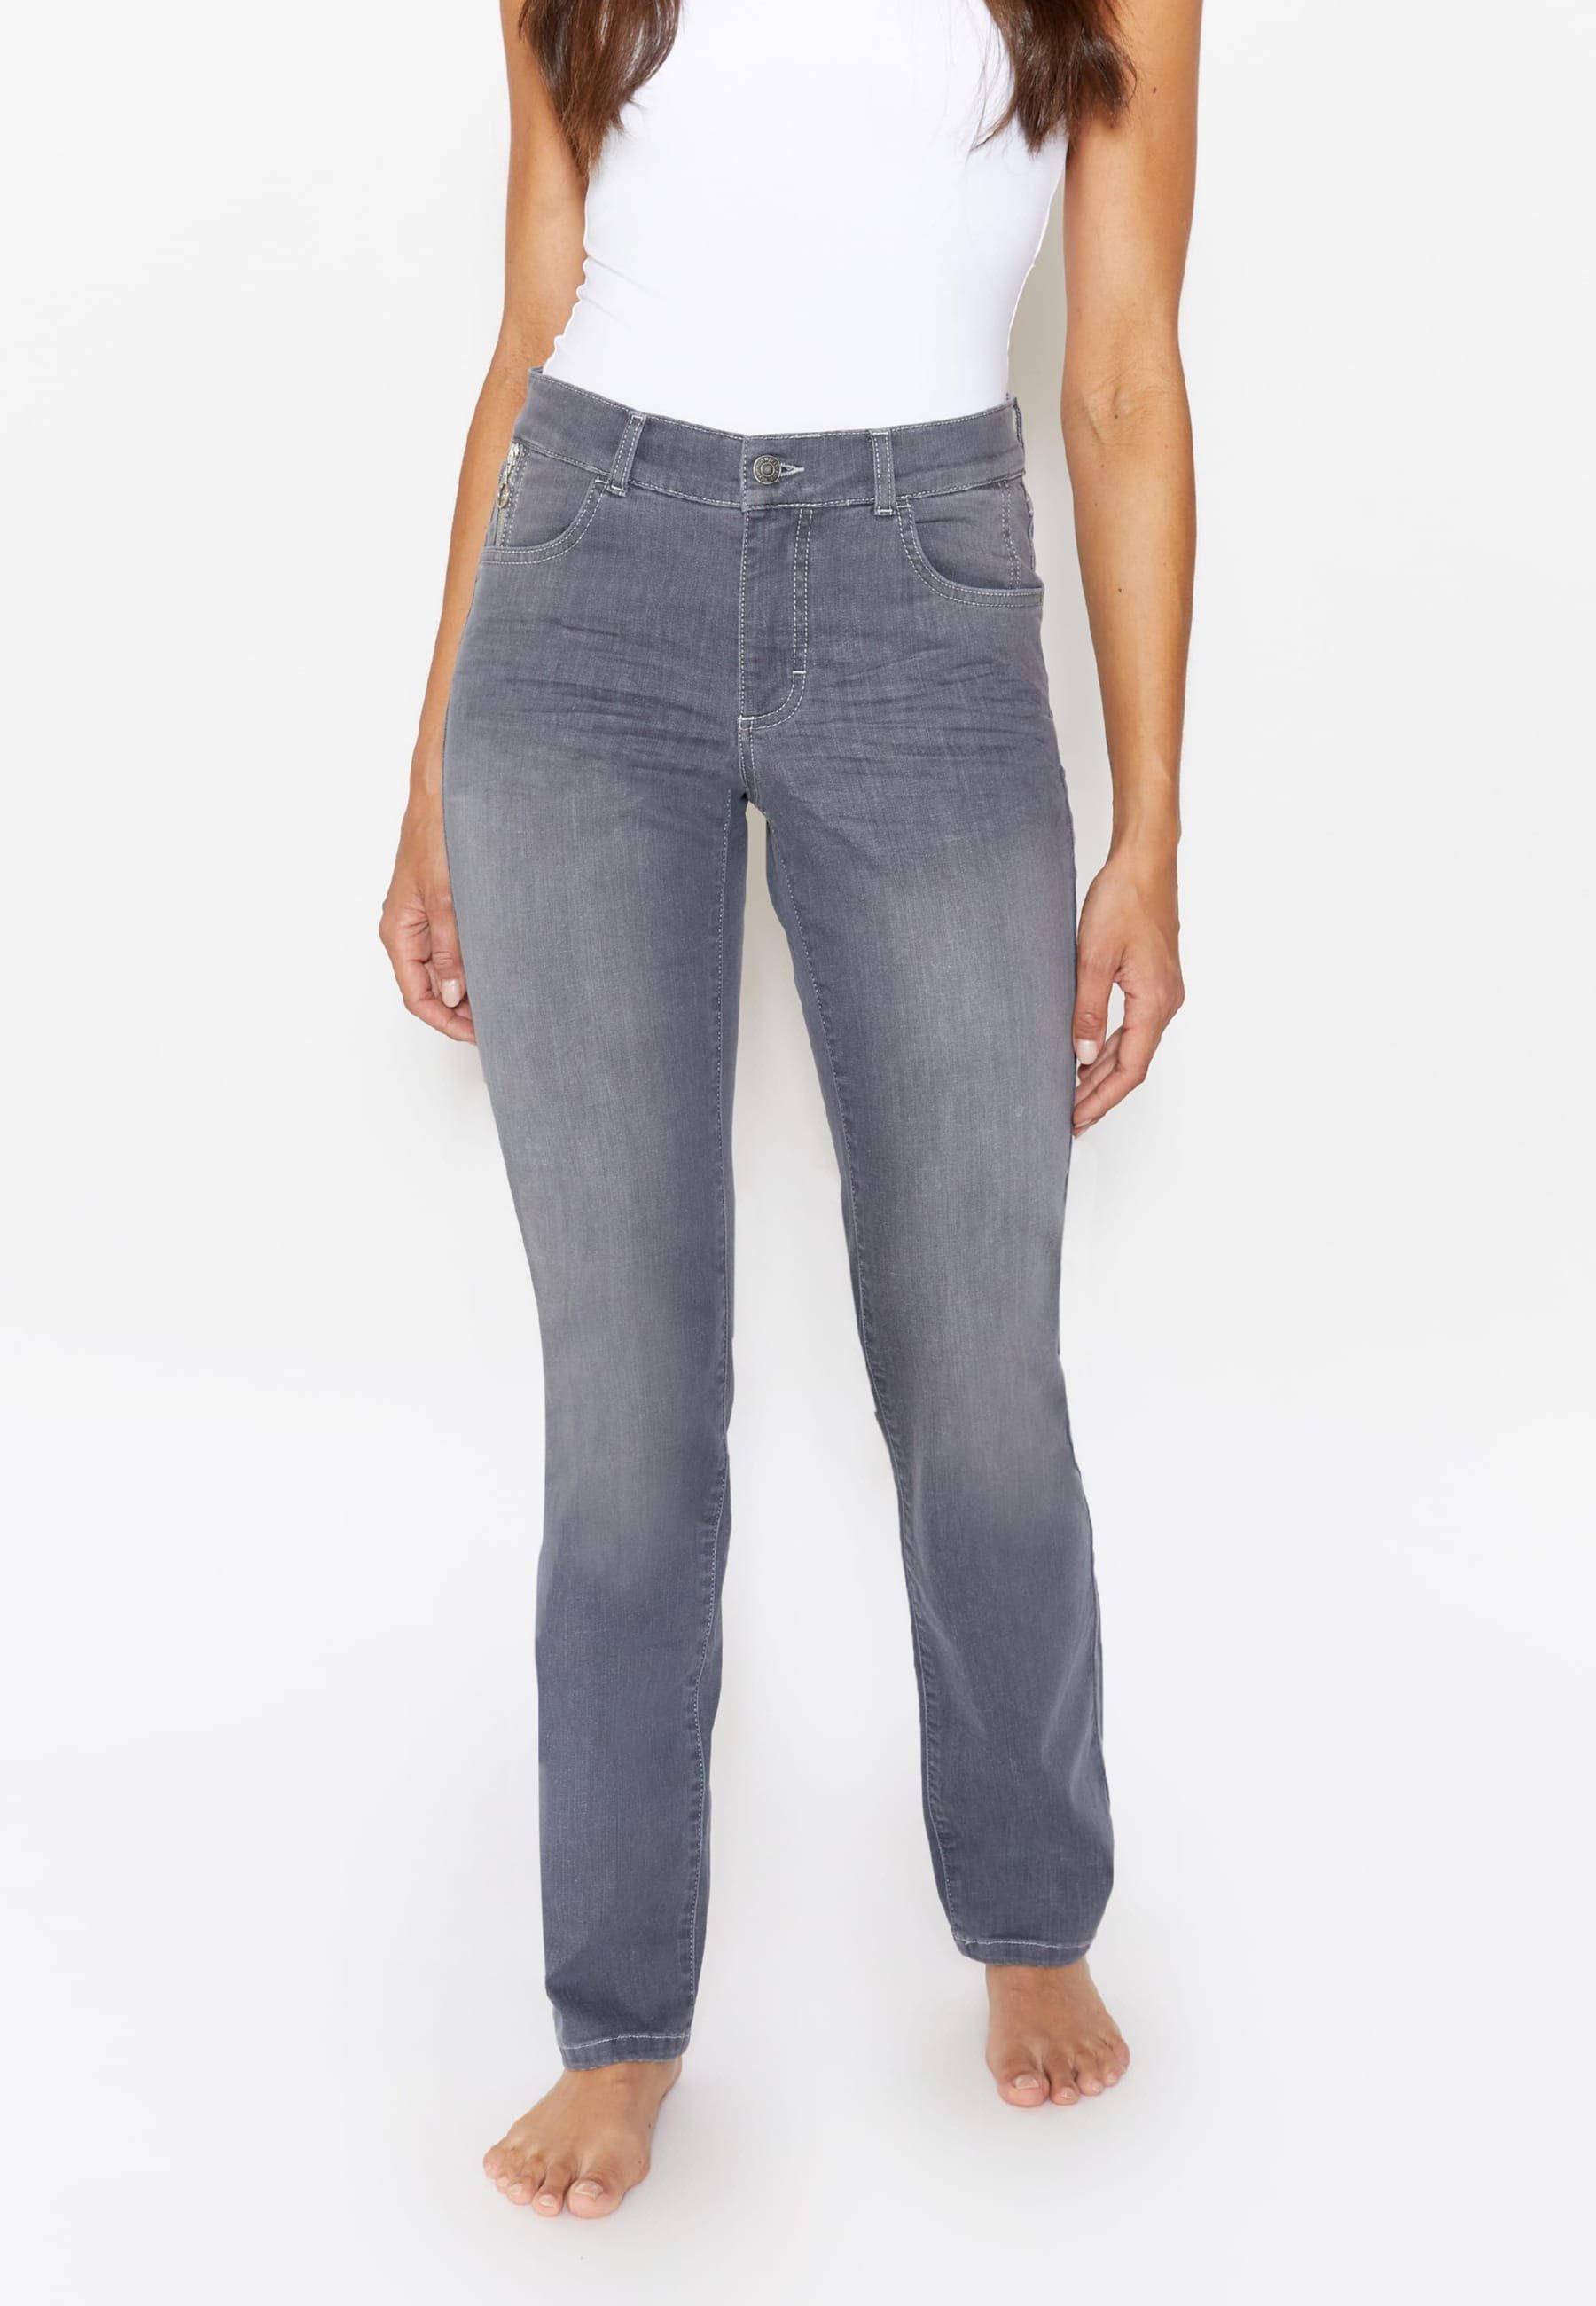 ANGELS Straight-Jeans 5-Pocket-Jeans Dolly 2.0 grau